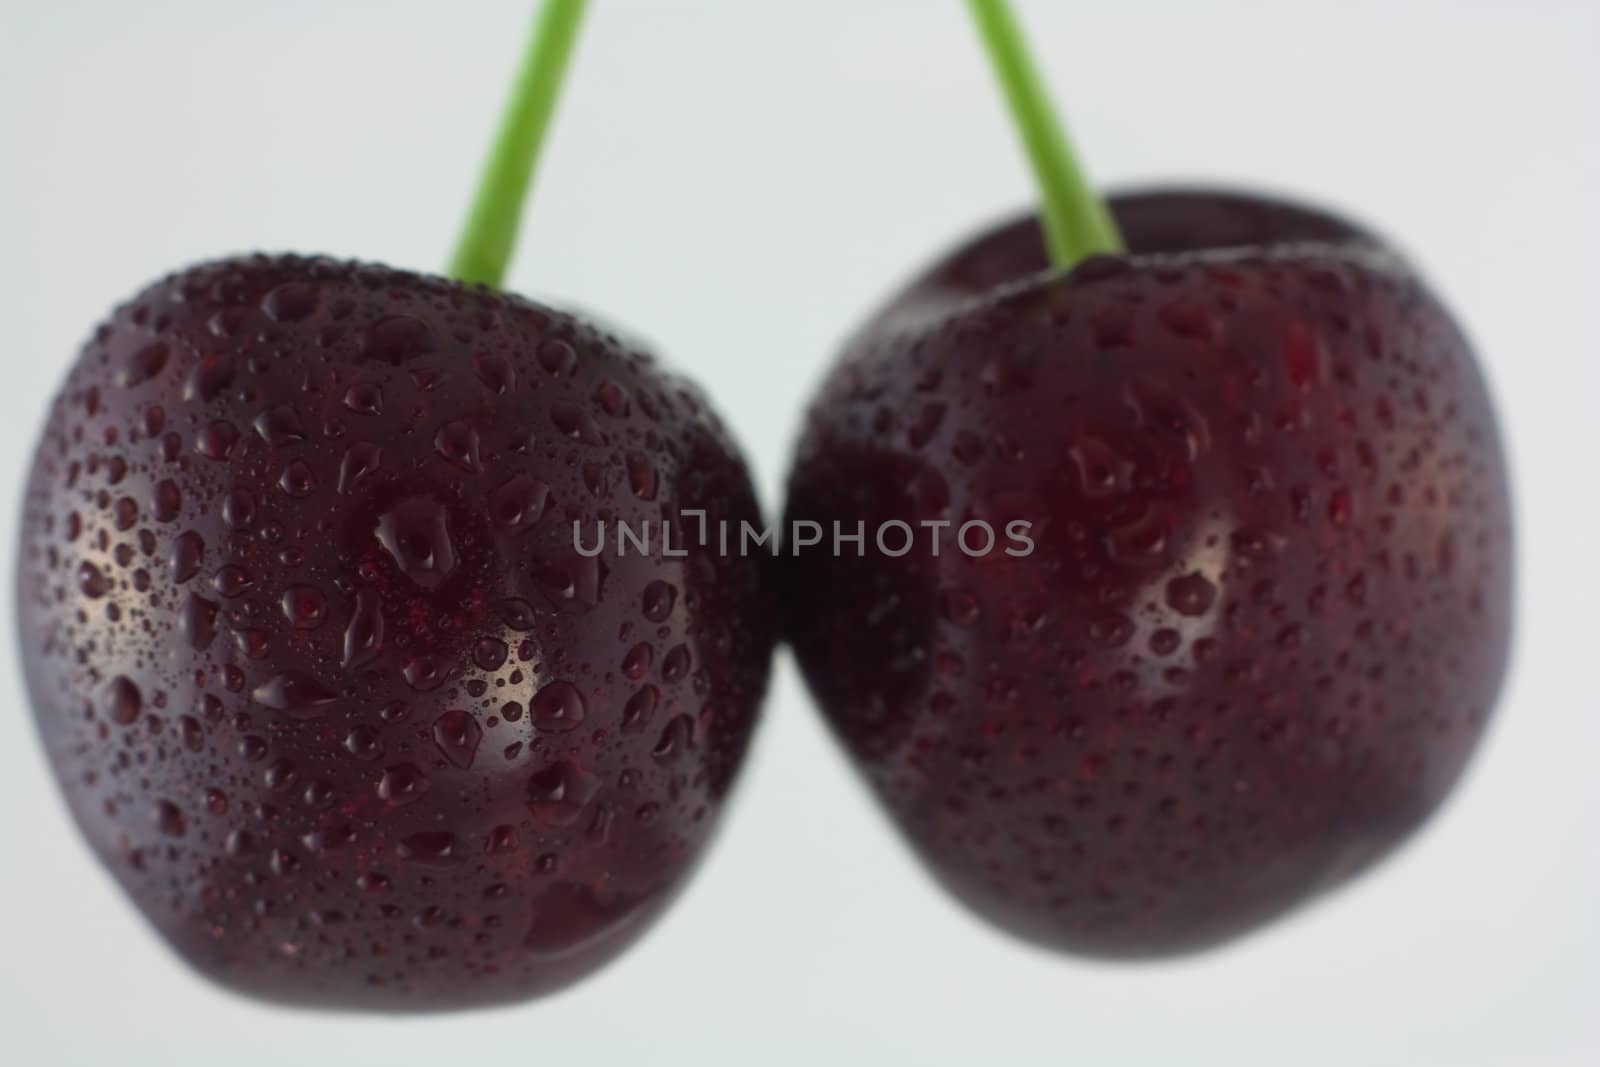 two wet cherries on white background
